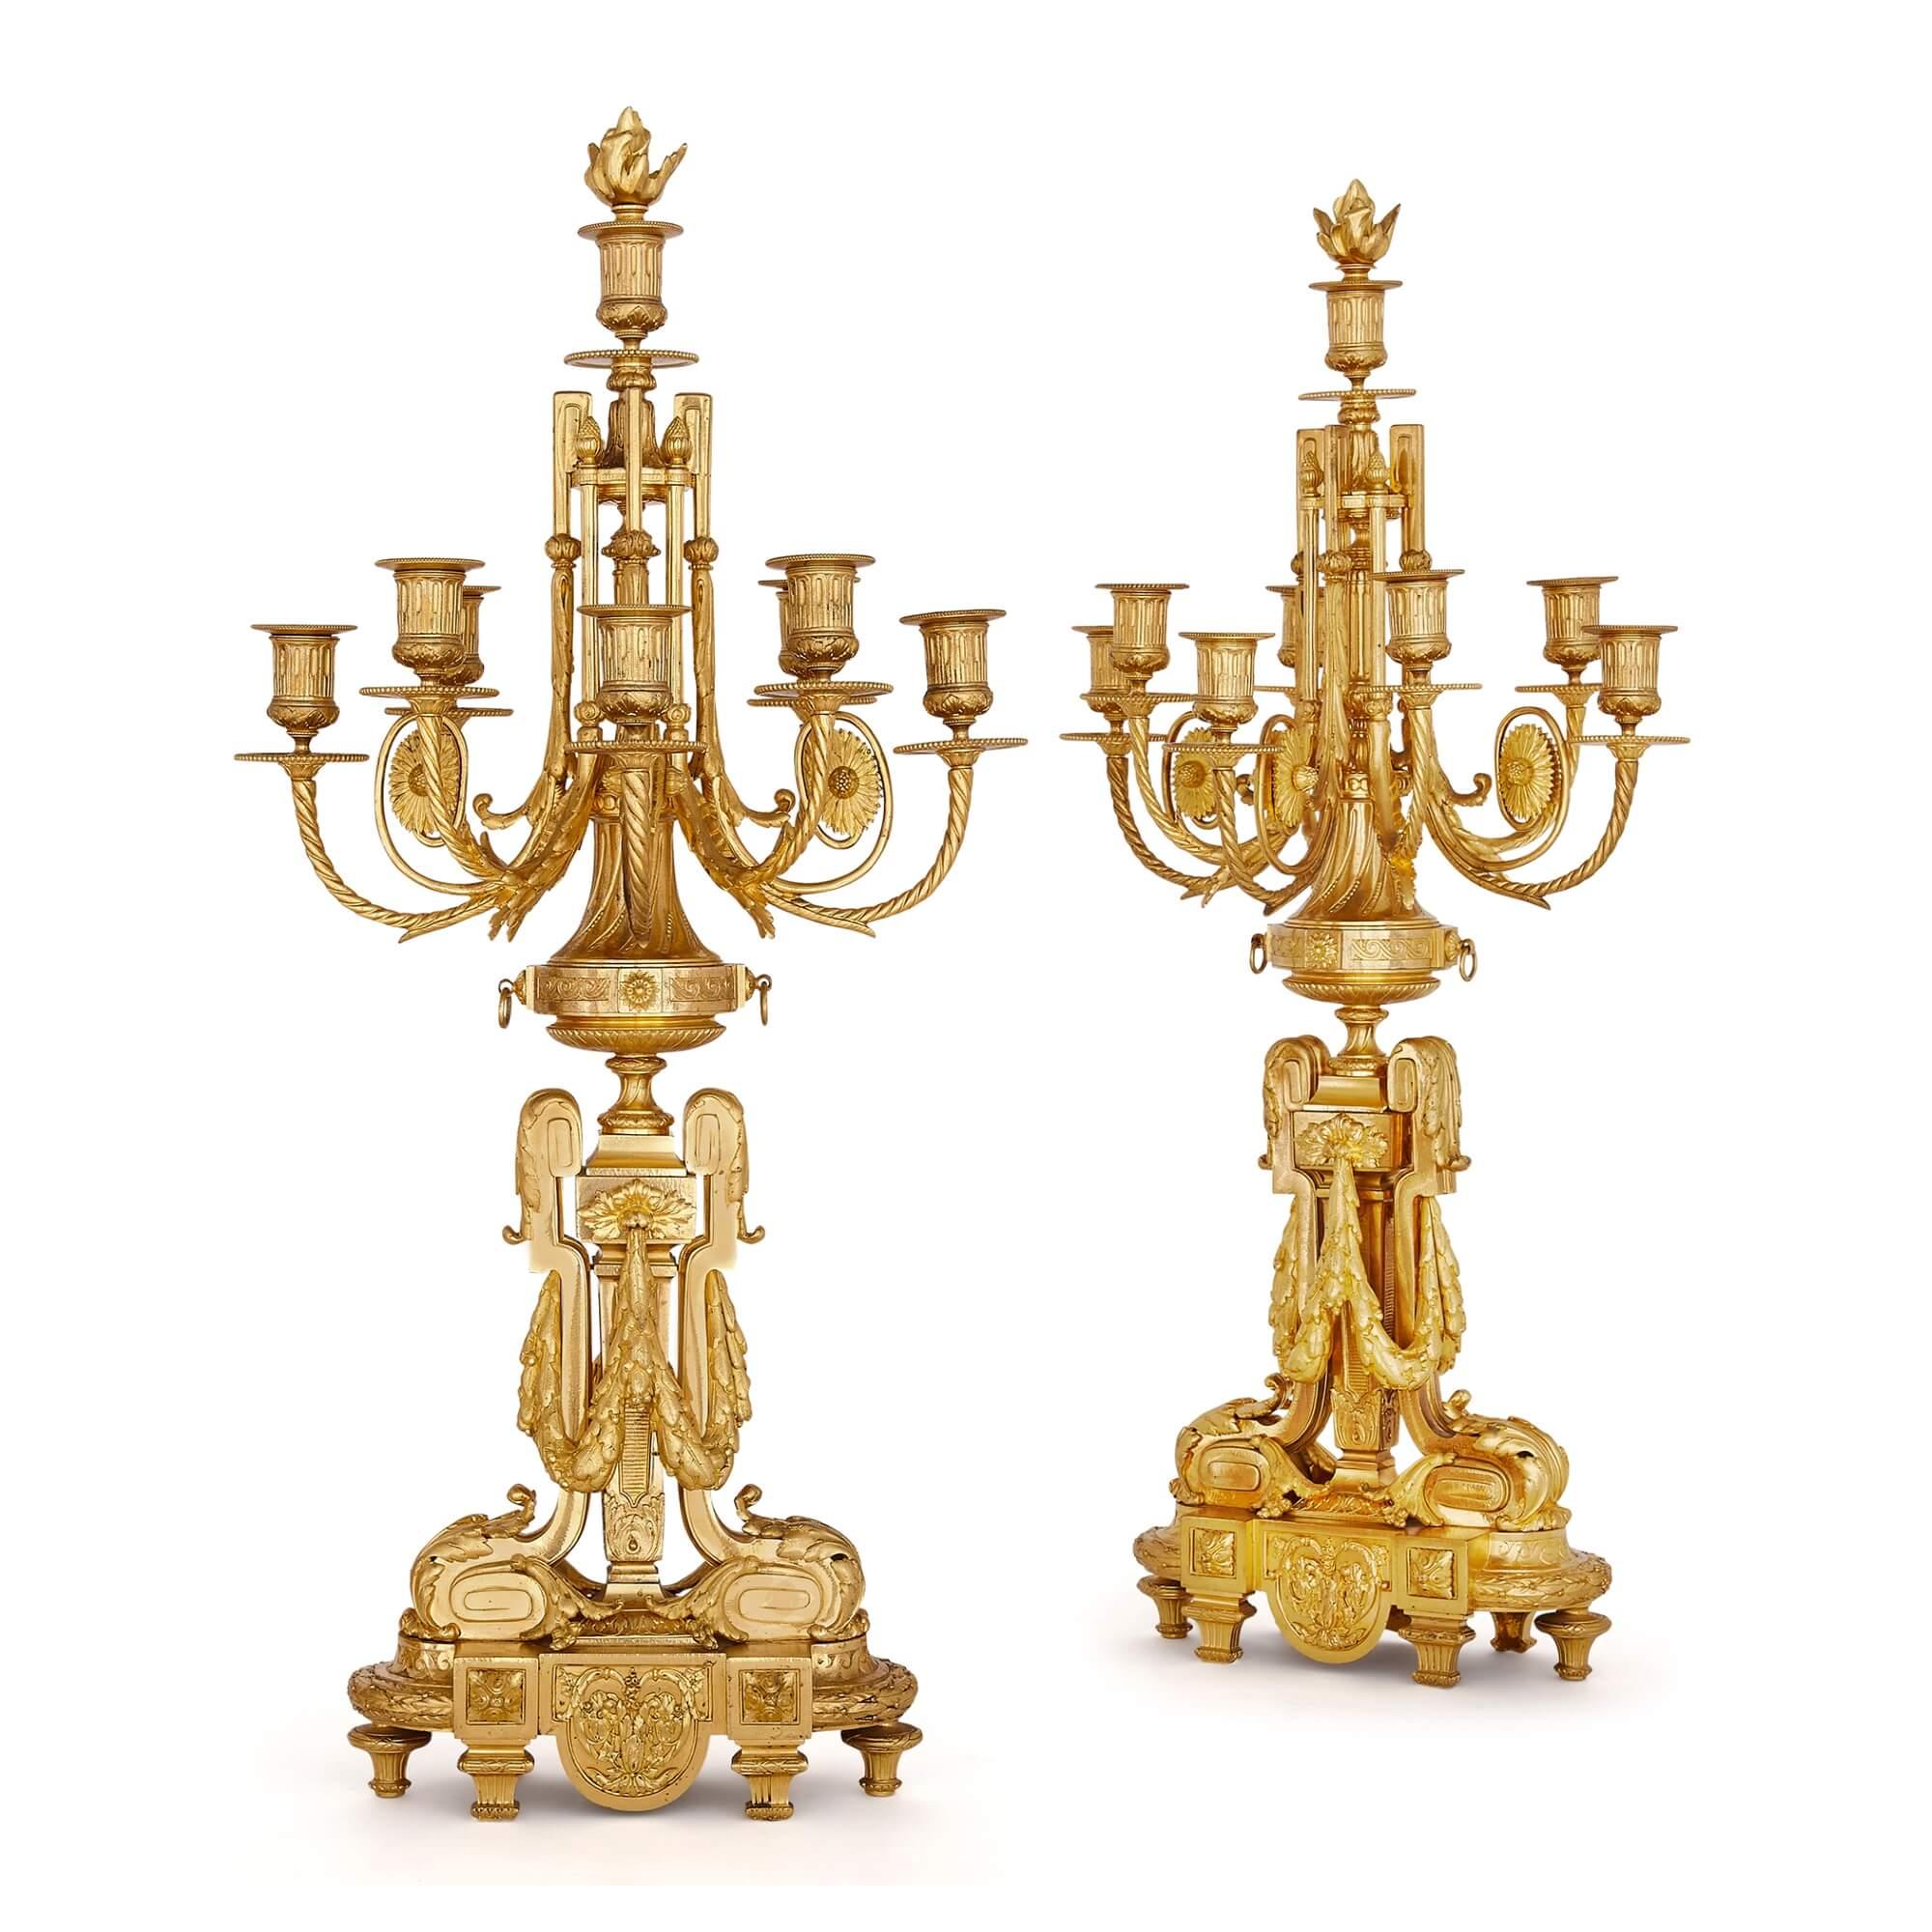 19th Century Large Louis XV Style Rococo Ormolu Three-Piece Clock Set by Barbedienne For Sale